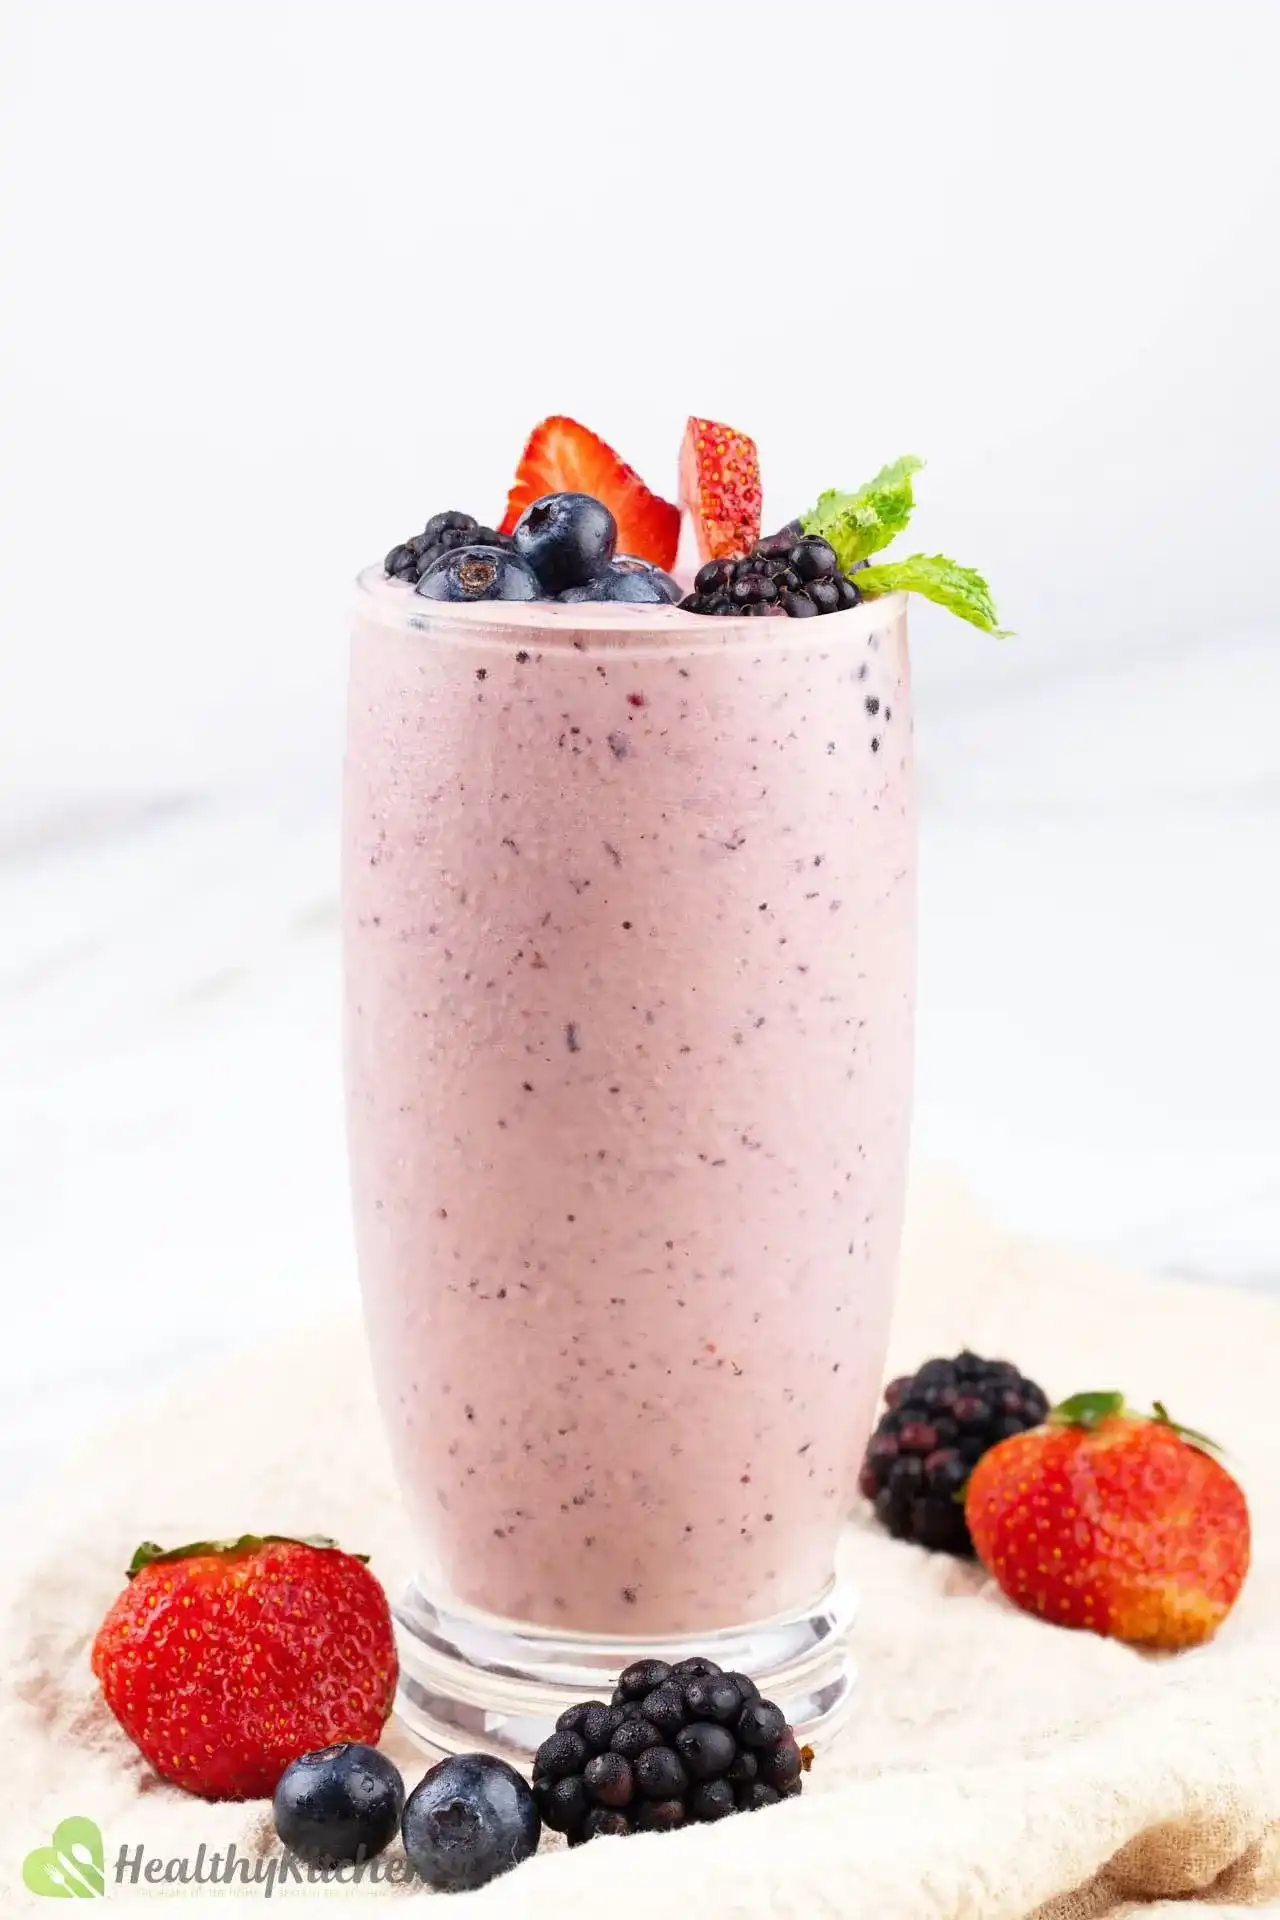 How To Make A Smoothie With Frozen Fruit - Liana's Kitchen